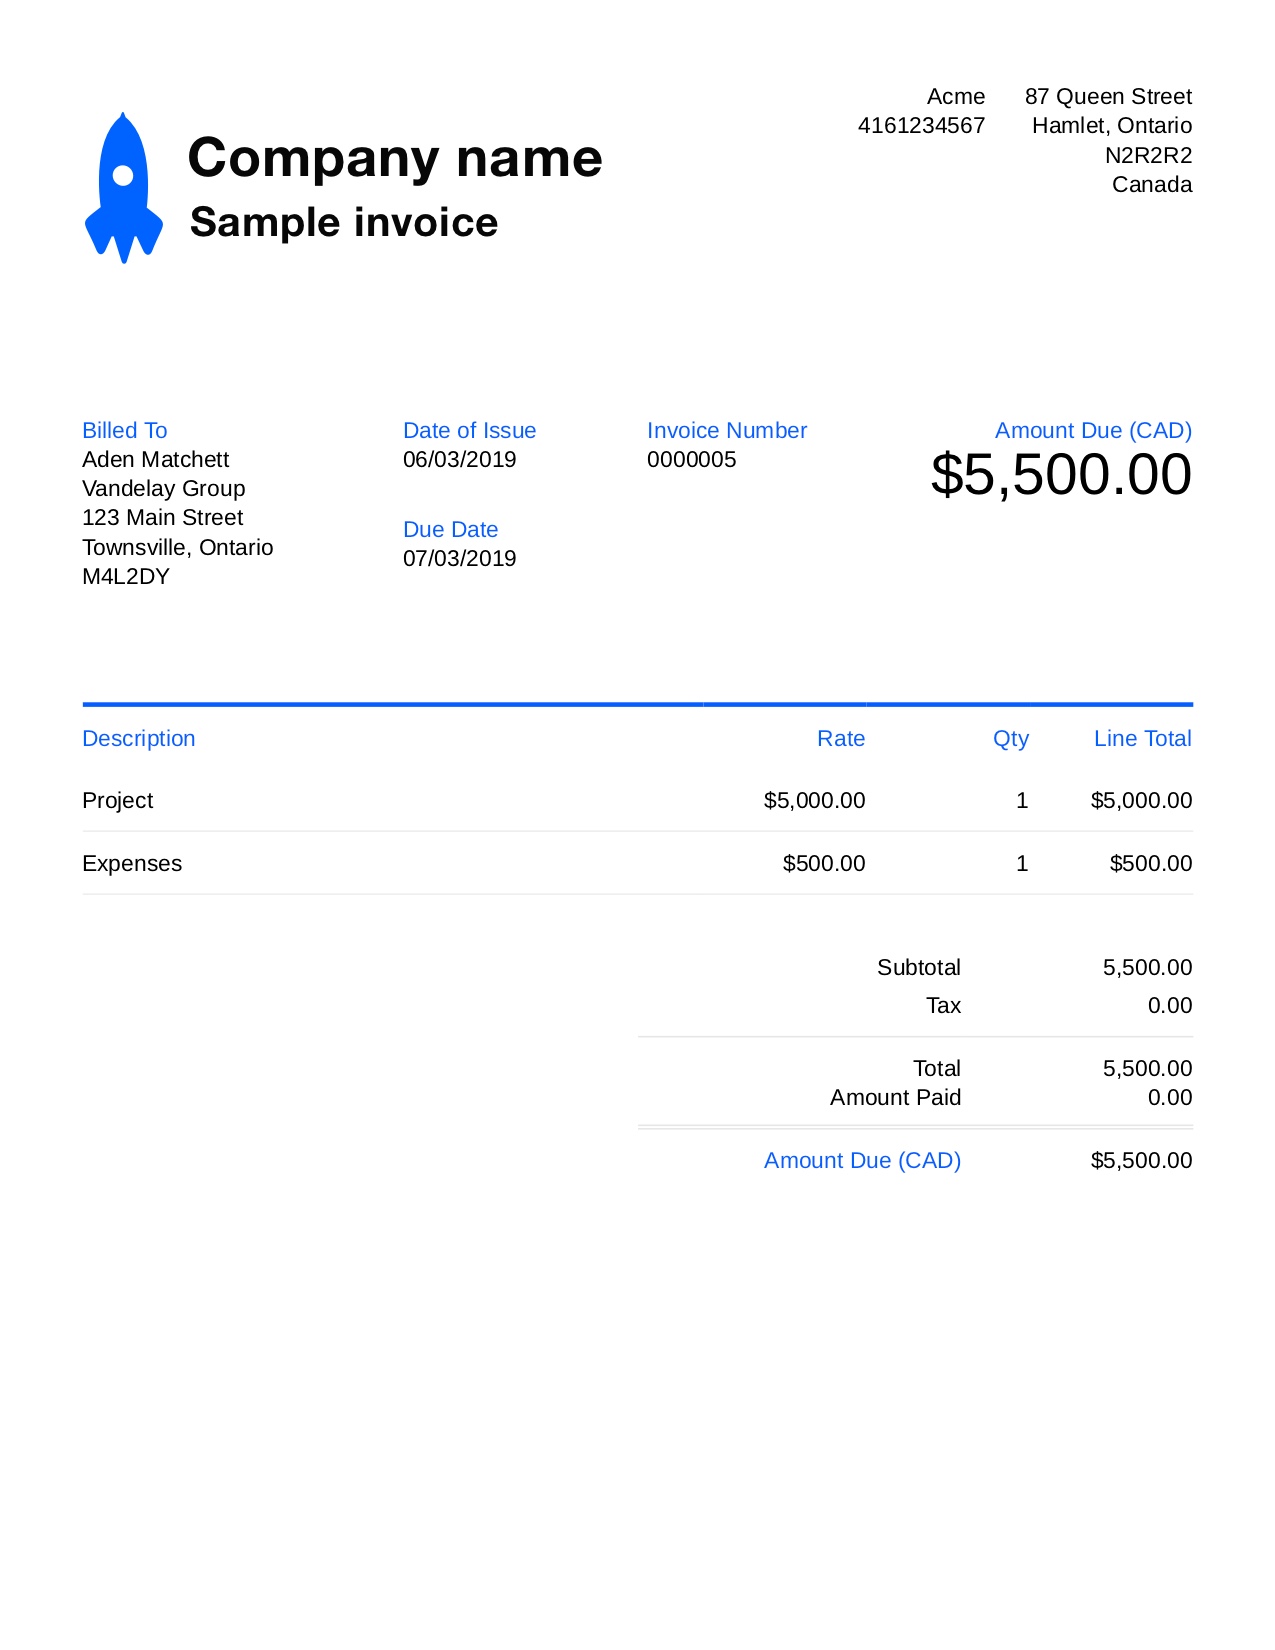 Free Sample Invoice Template. Customize and Send in 90 Seconds